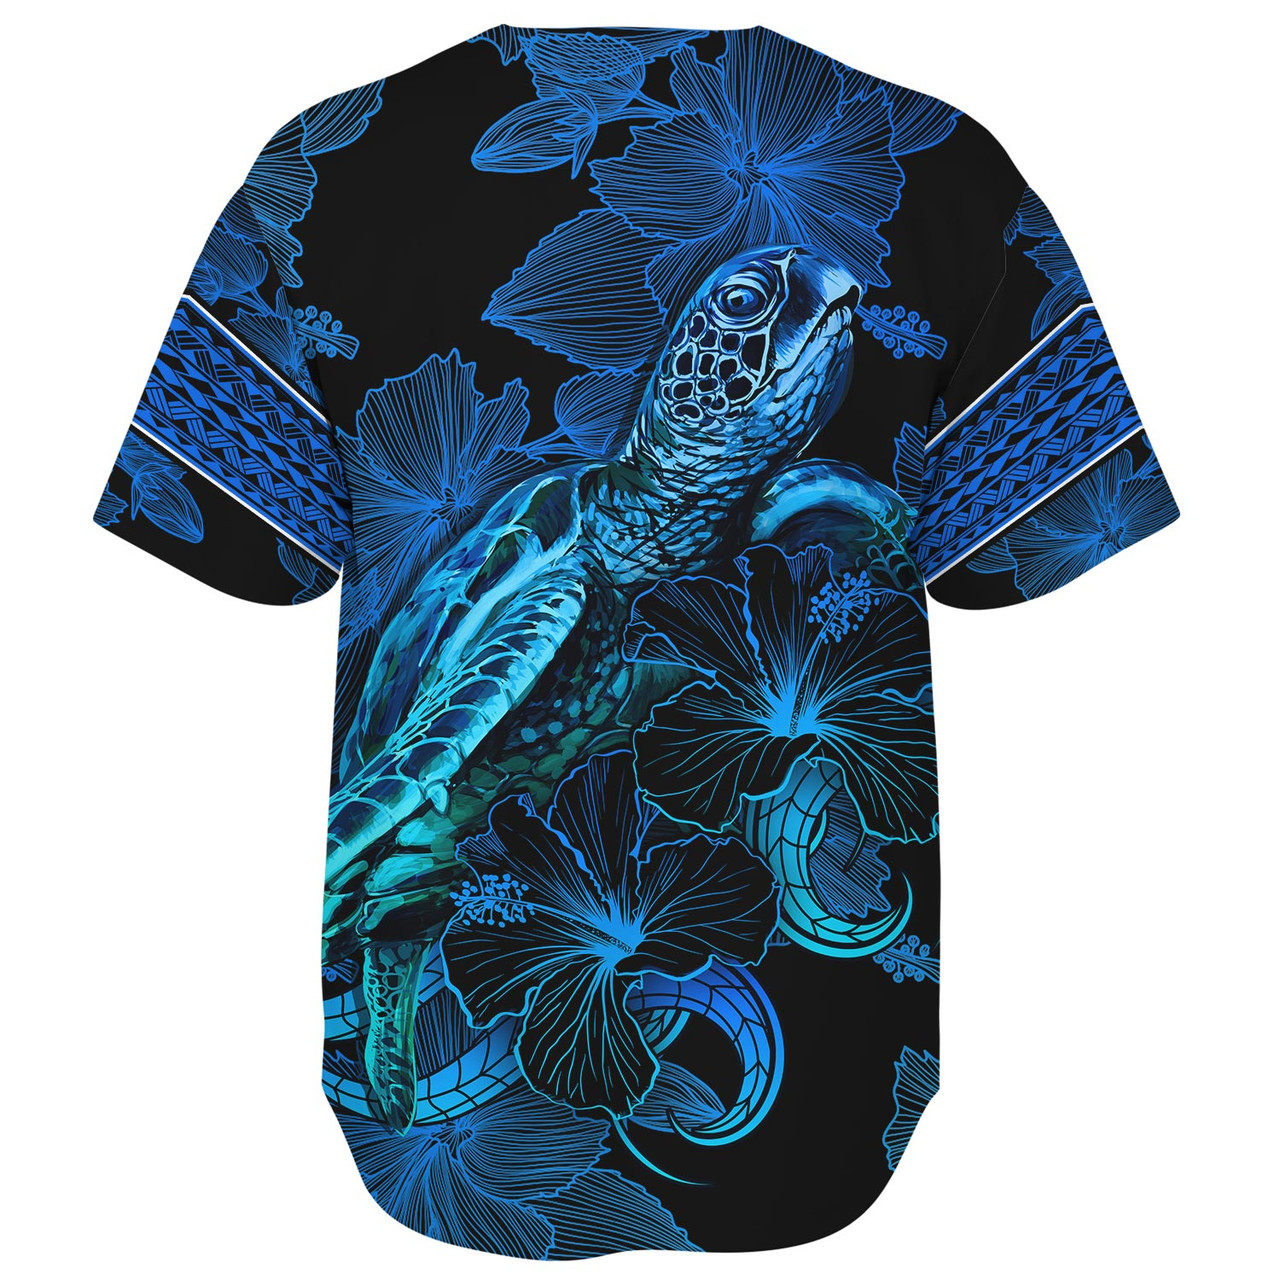 Philippines Filipinos Baseball Shirt Sea Turtle With Blooming Hibiscus Flowers Tribal Blue